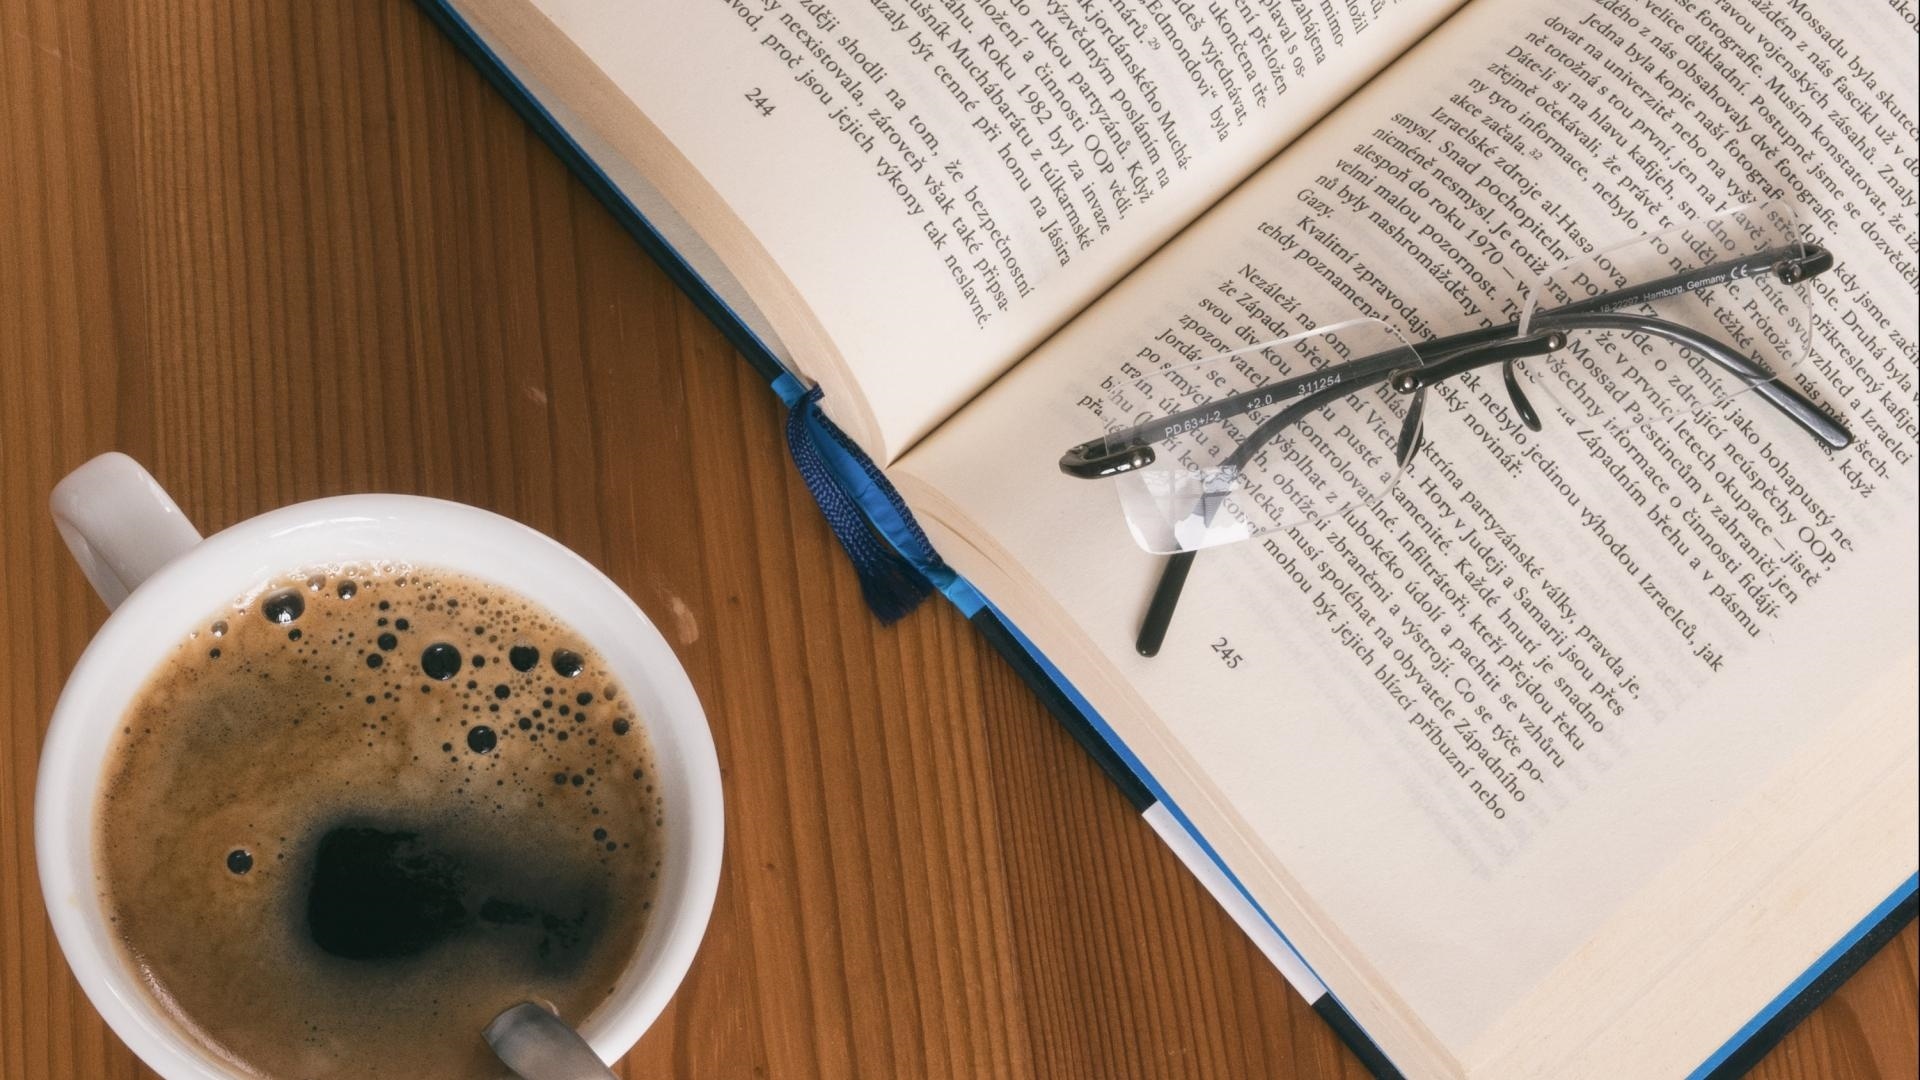 Book And Coffee Background